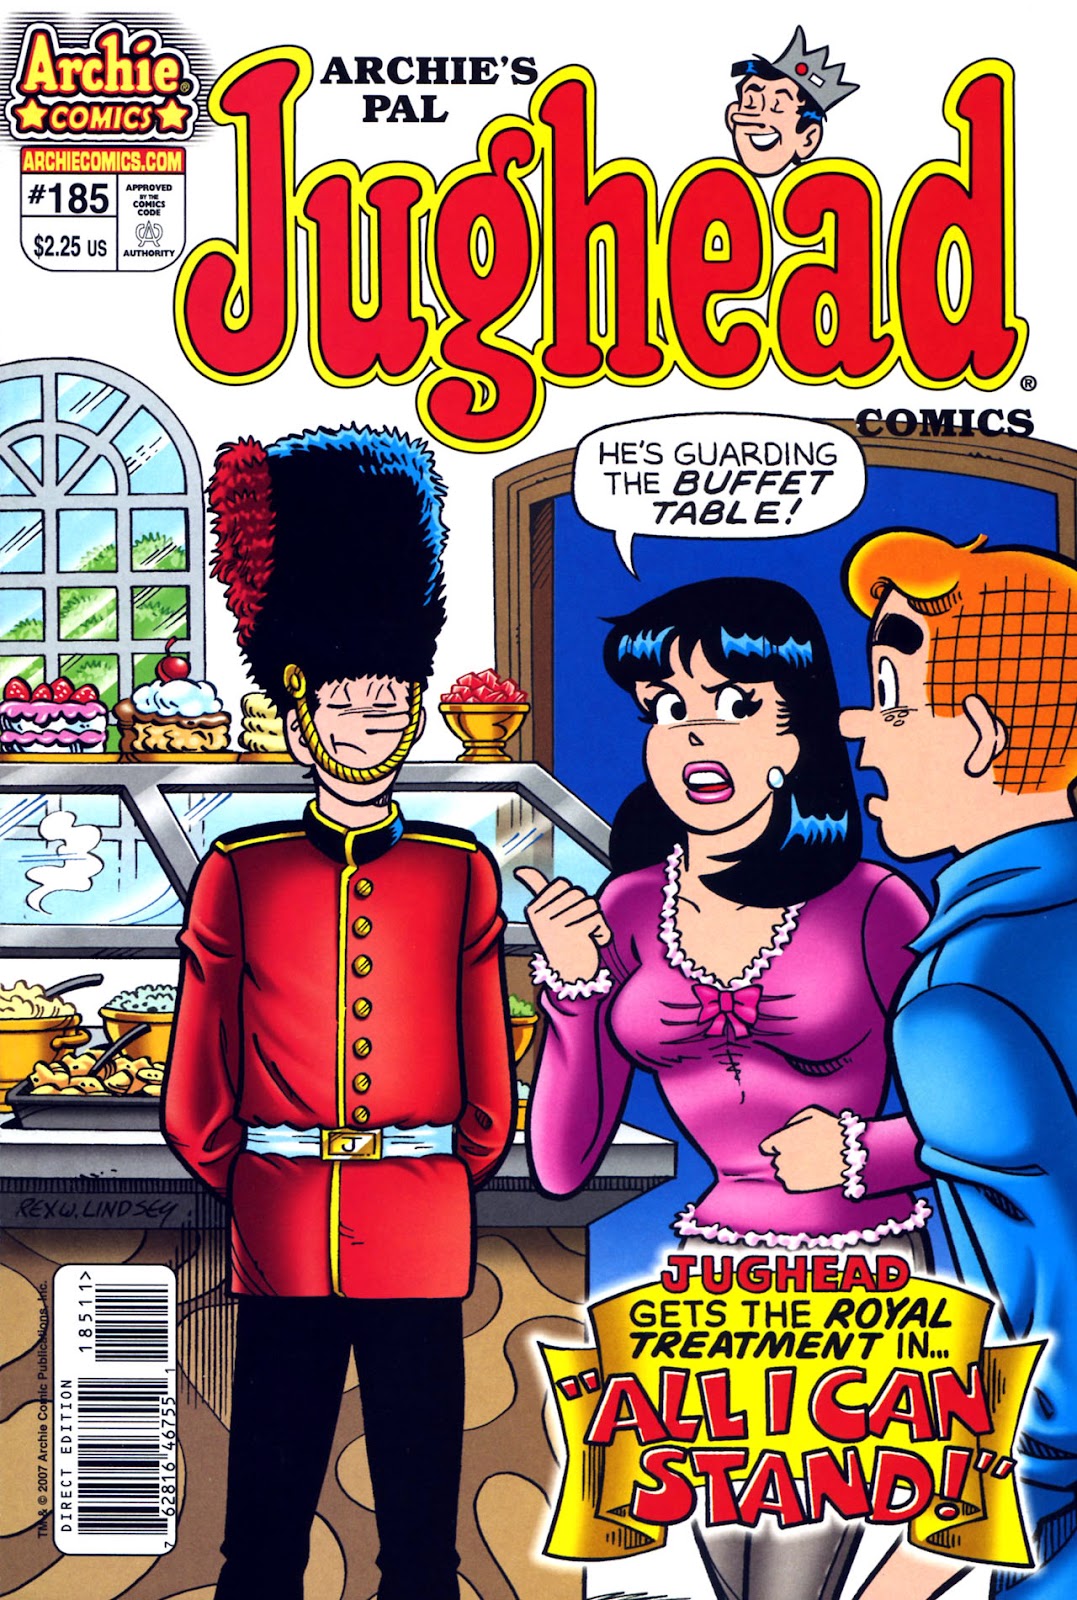 Archie's Pal Jughead Comics issue 185 - Page 1